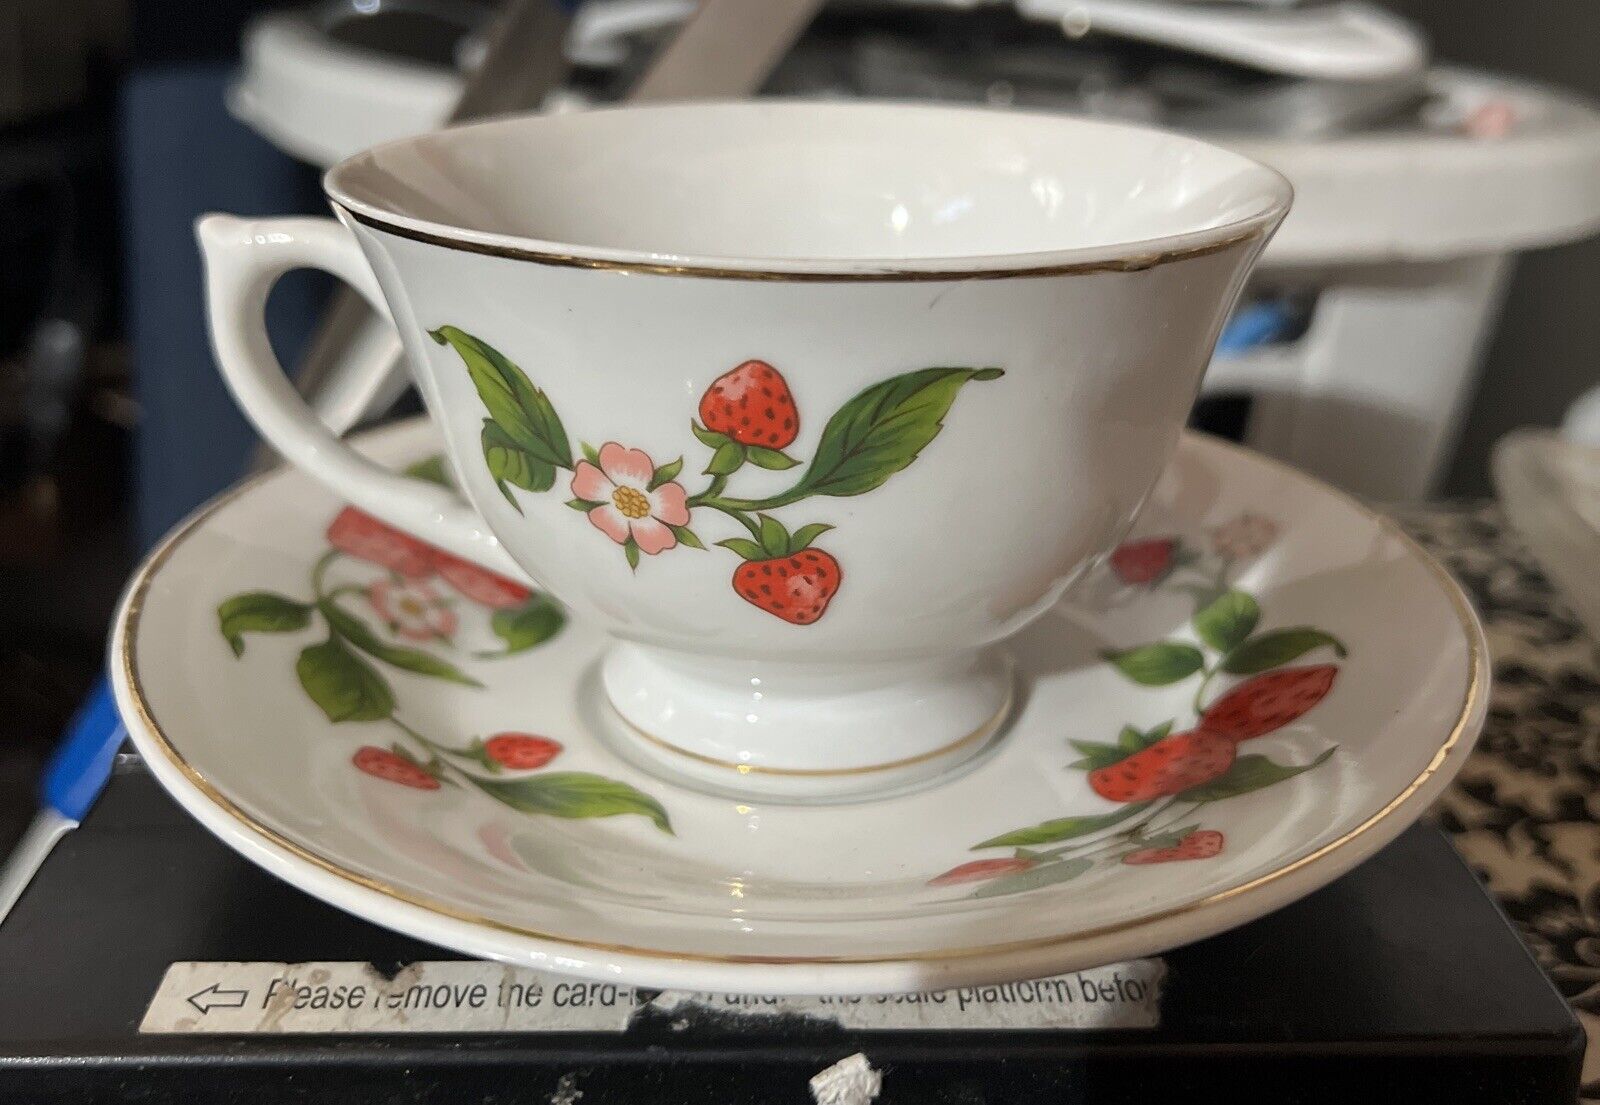 TELEFLORA Vintage Strawberry Teacup & Saucer With Display Stand 